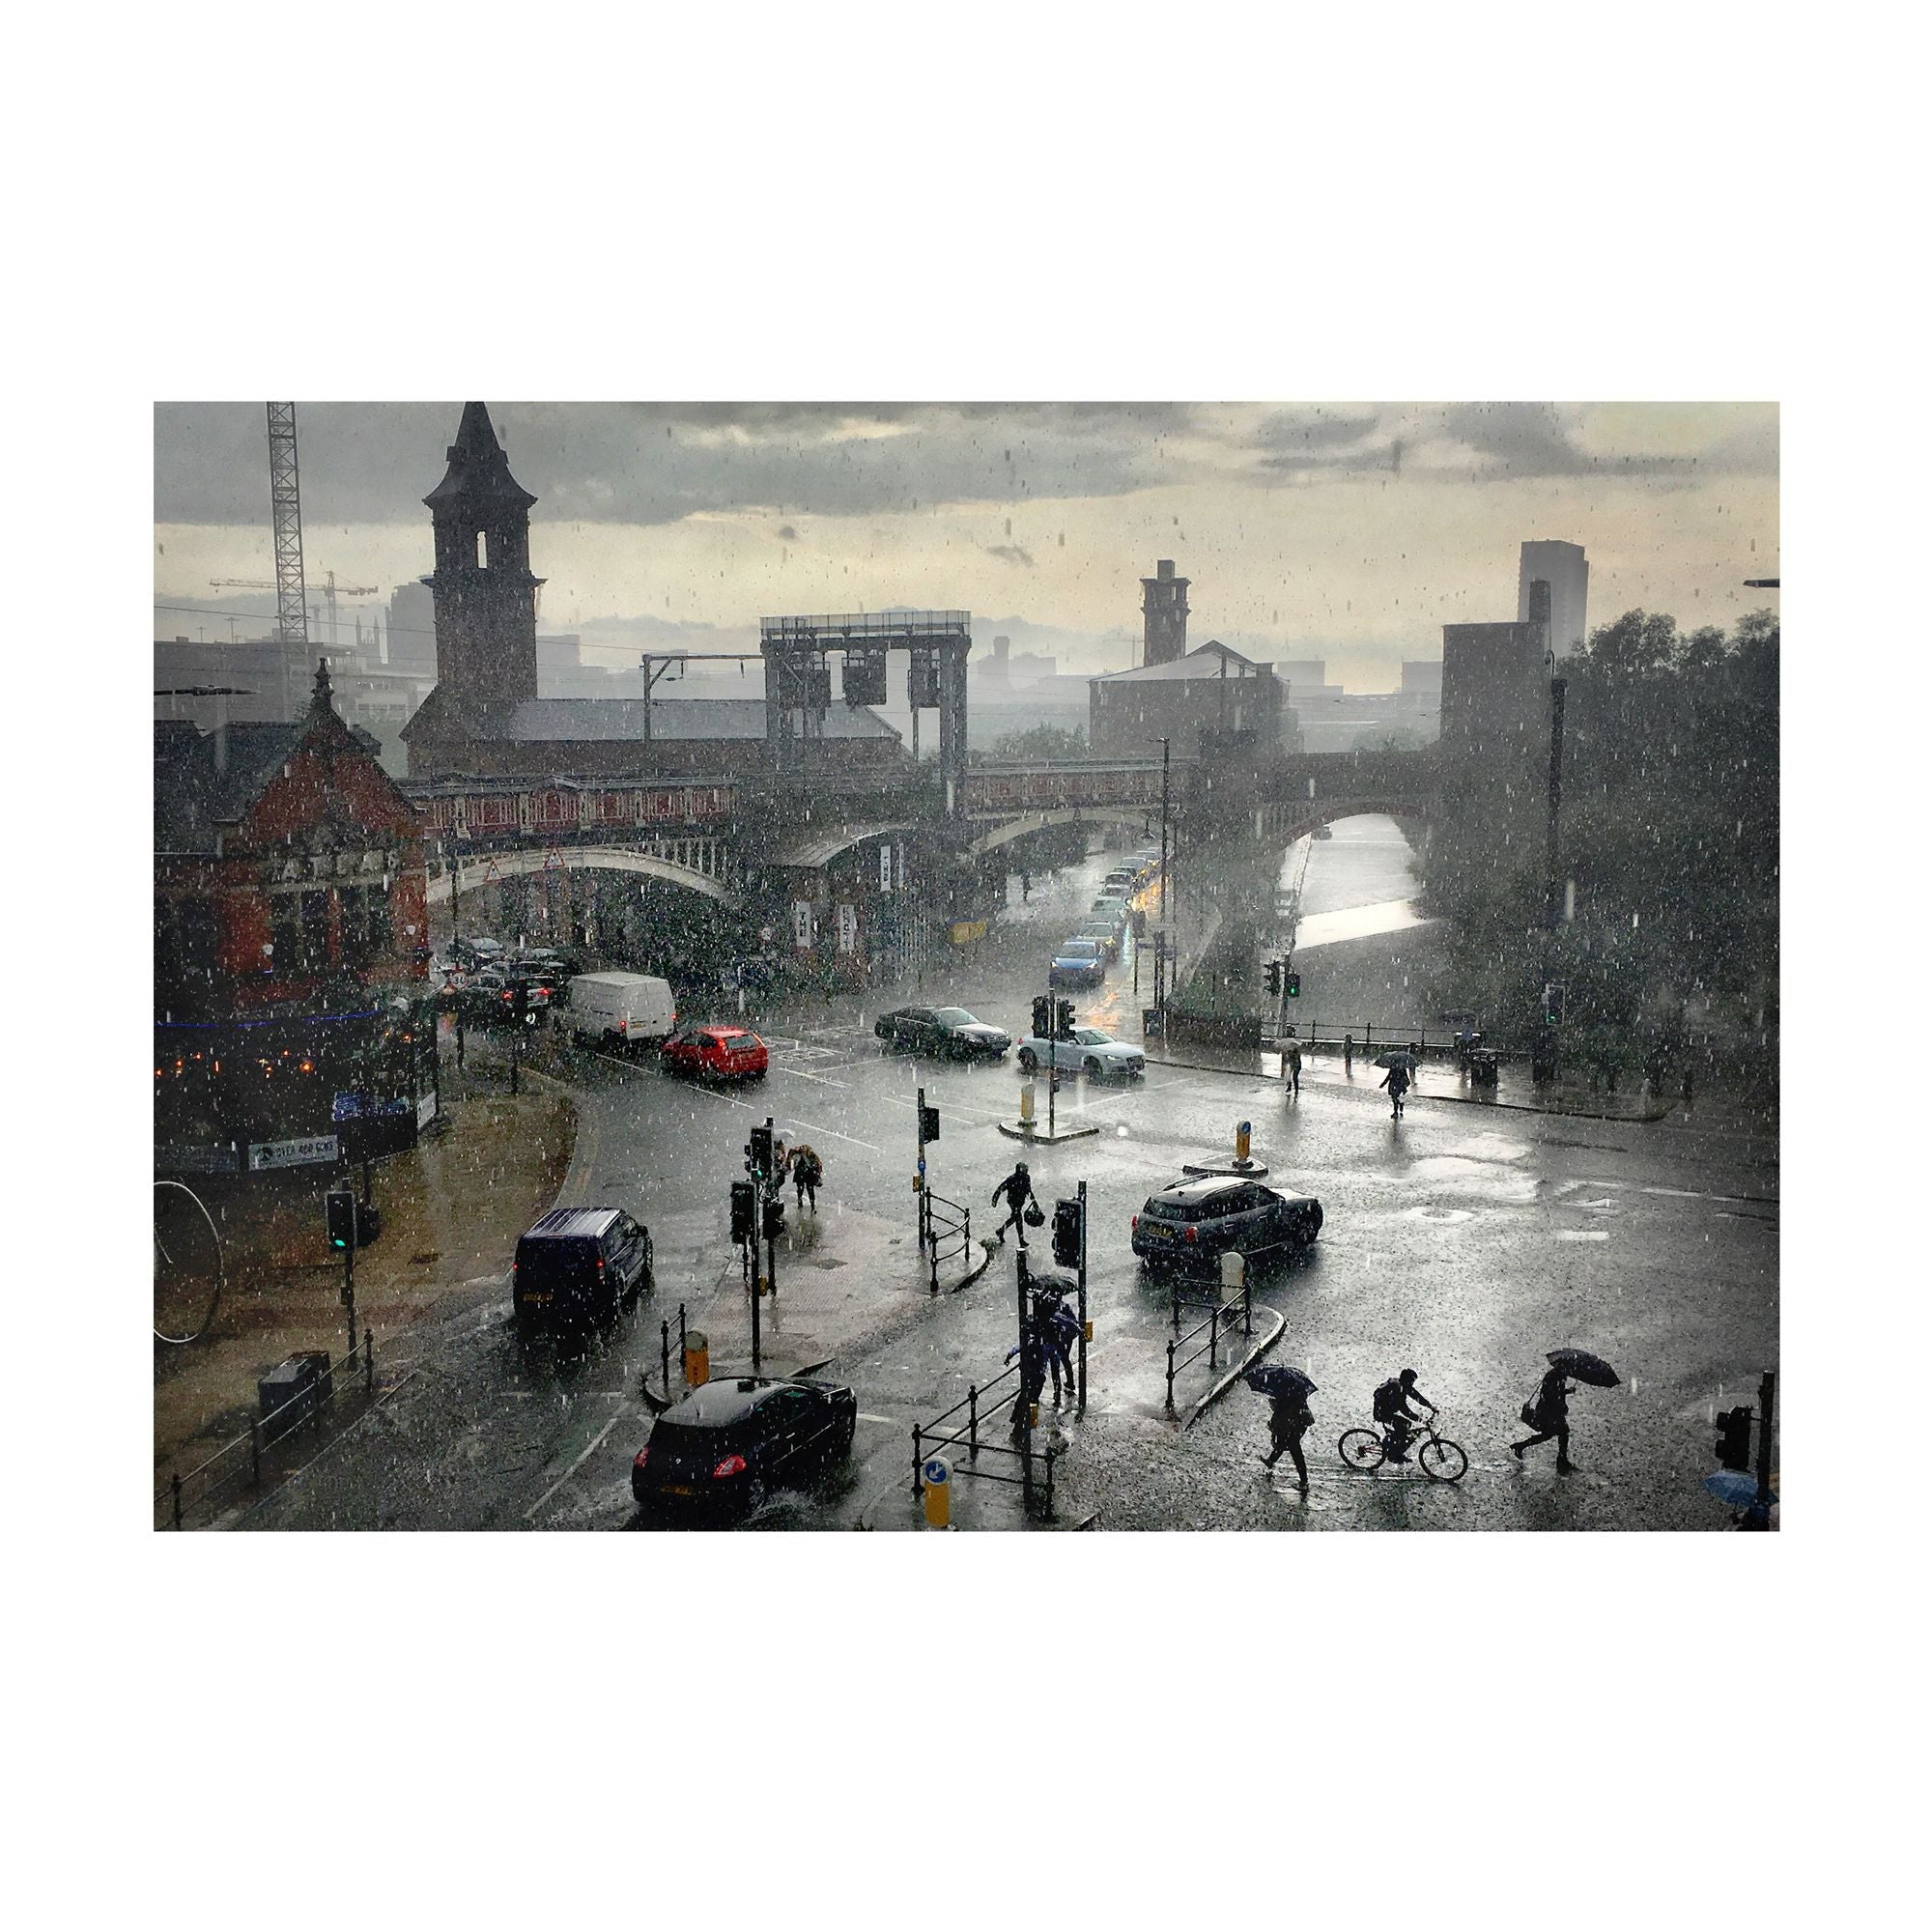 Simon Buckley of Not Quite Light, photography of a rainstorm by a traffic light near Deansgate.